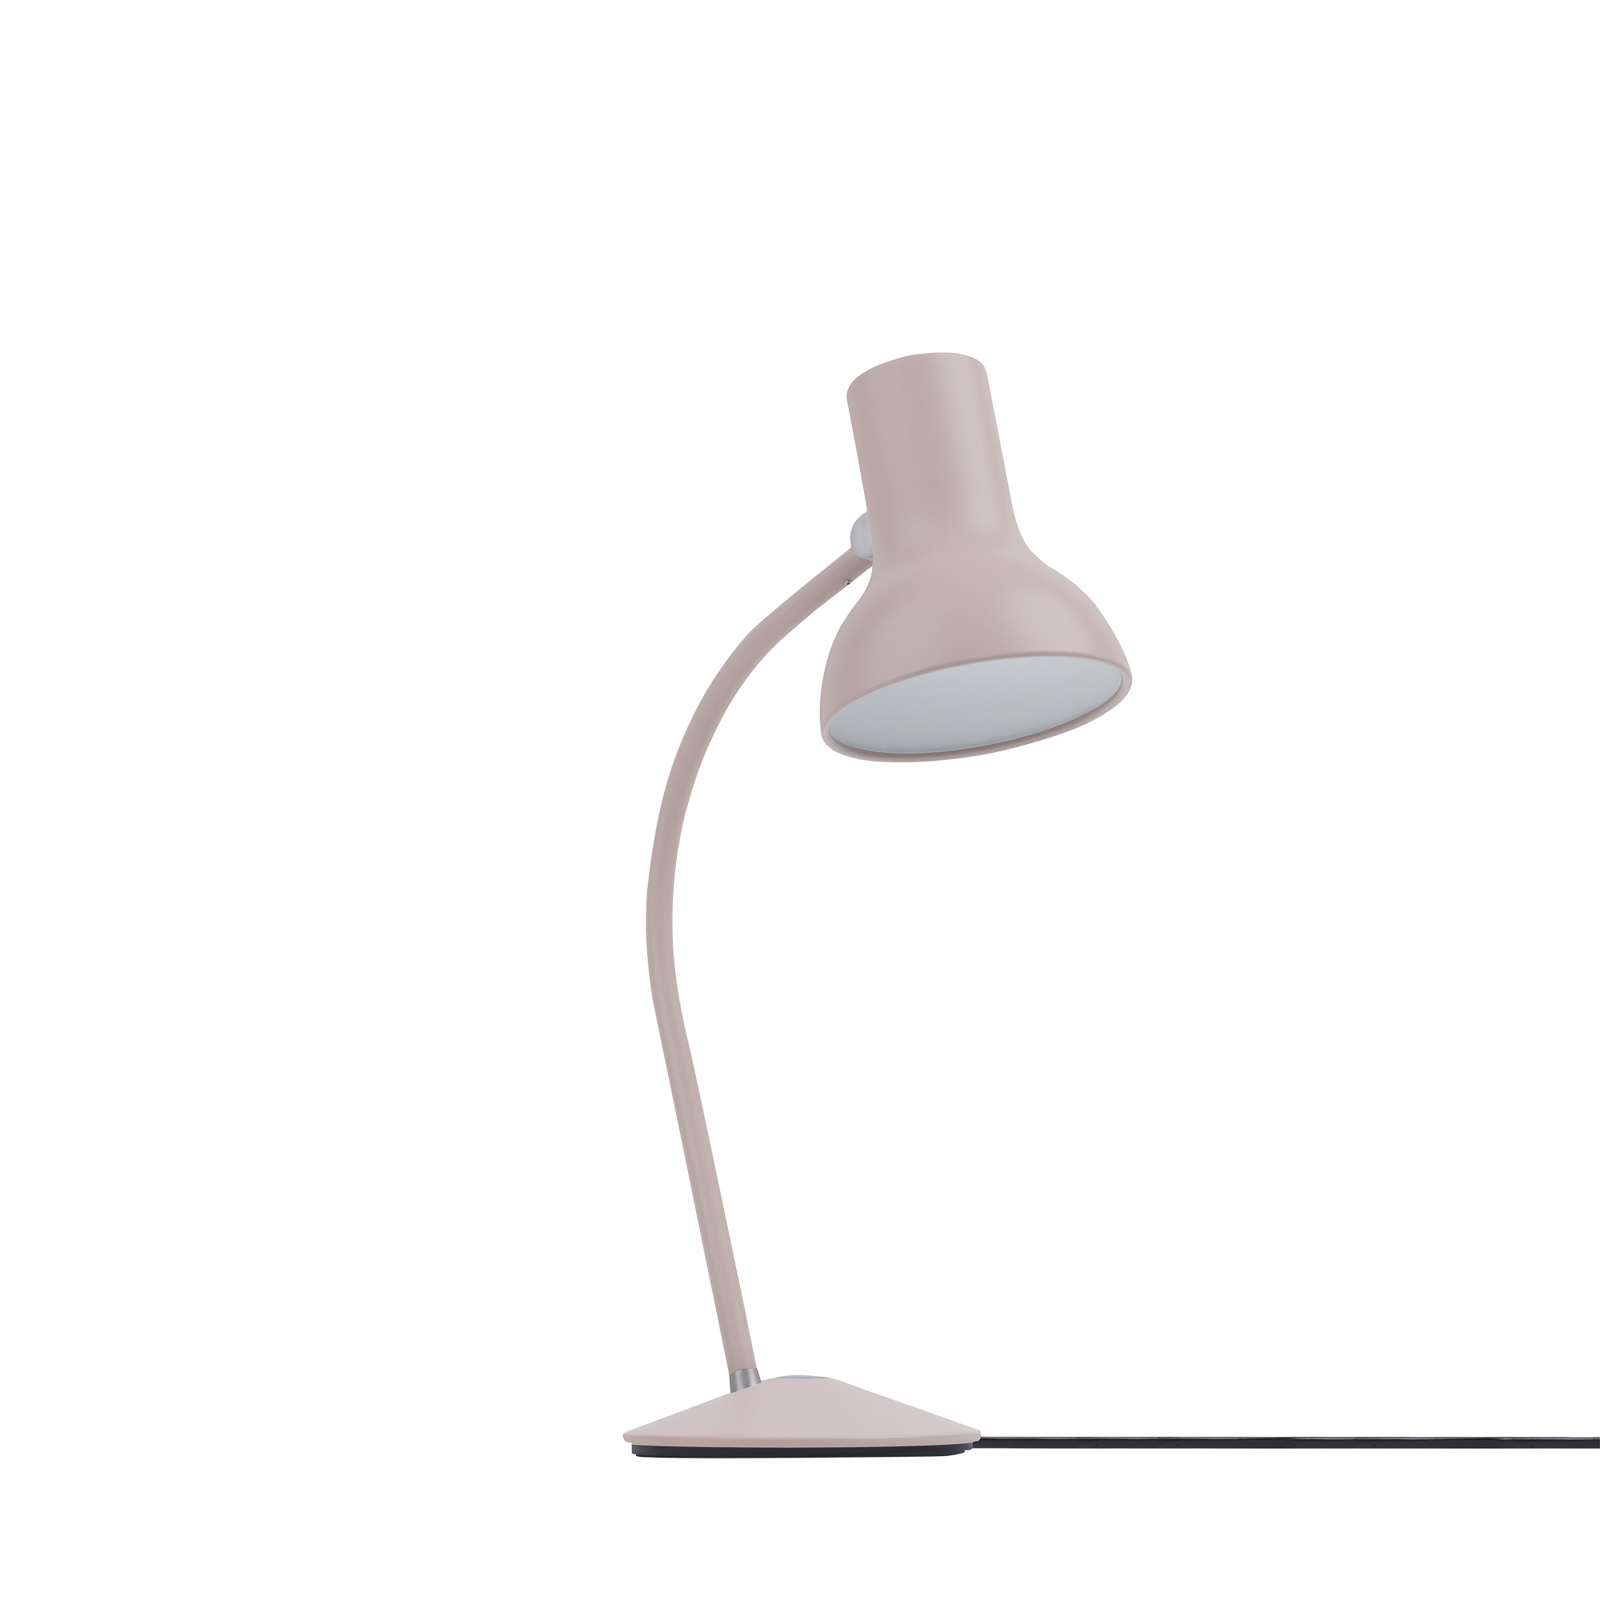 Anglepoise Type 75 Mini lampe à poser, gris taupe